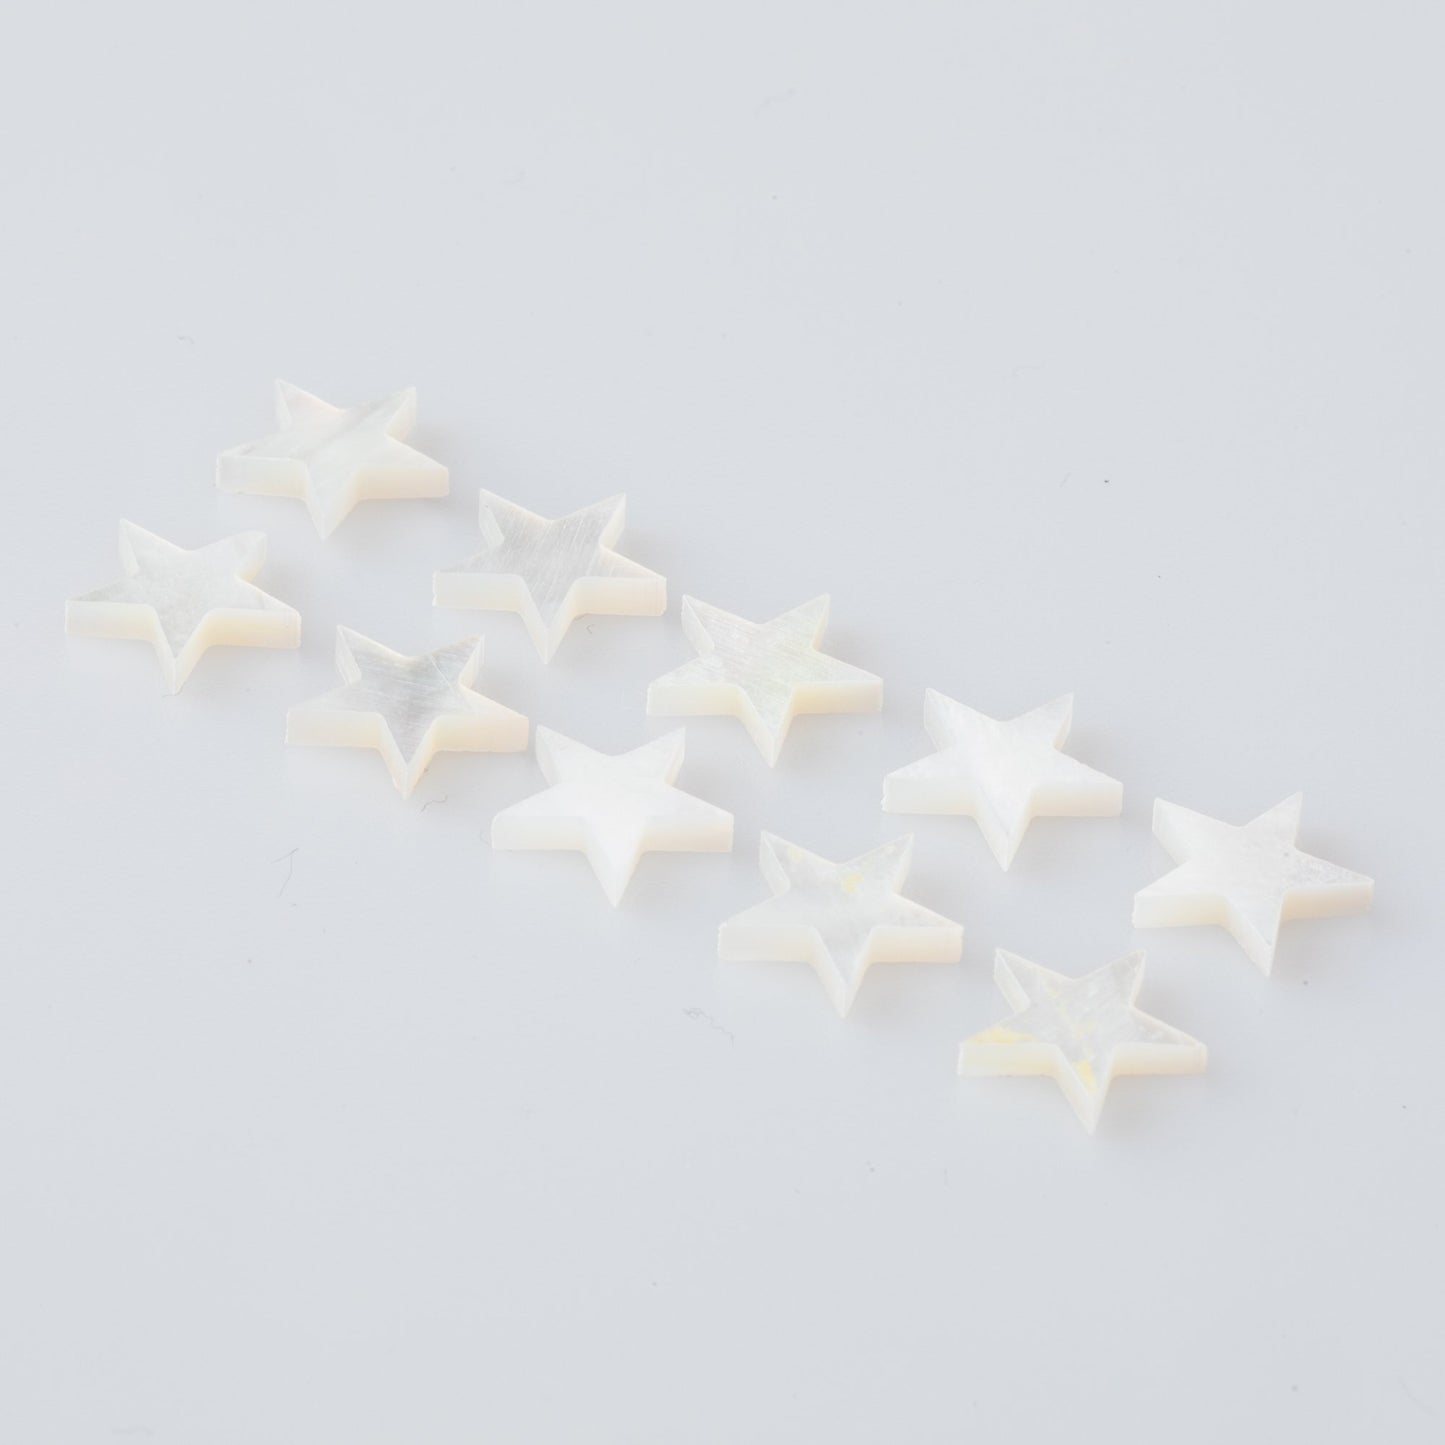 Mother of Pearl -Star Inlays (Set of 10)